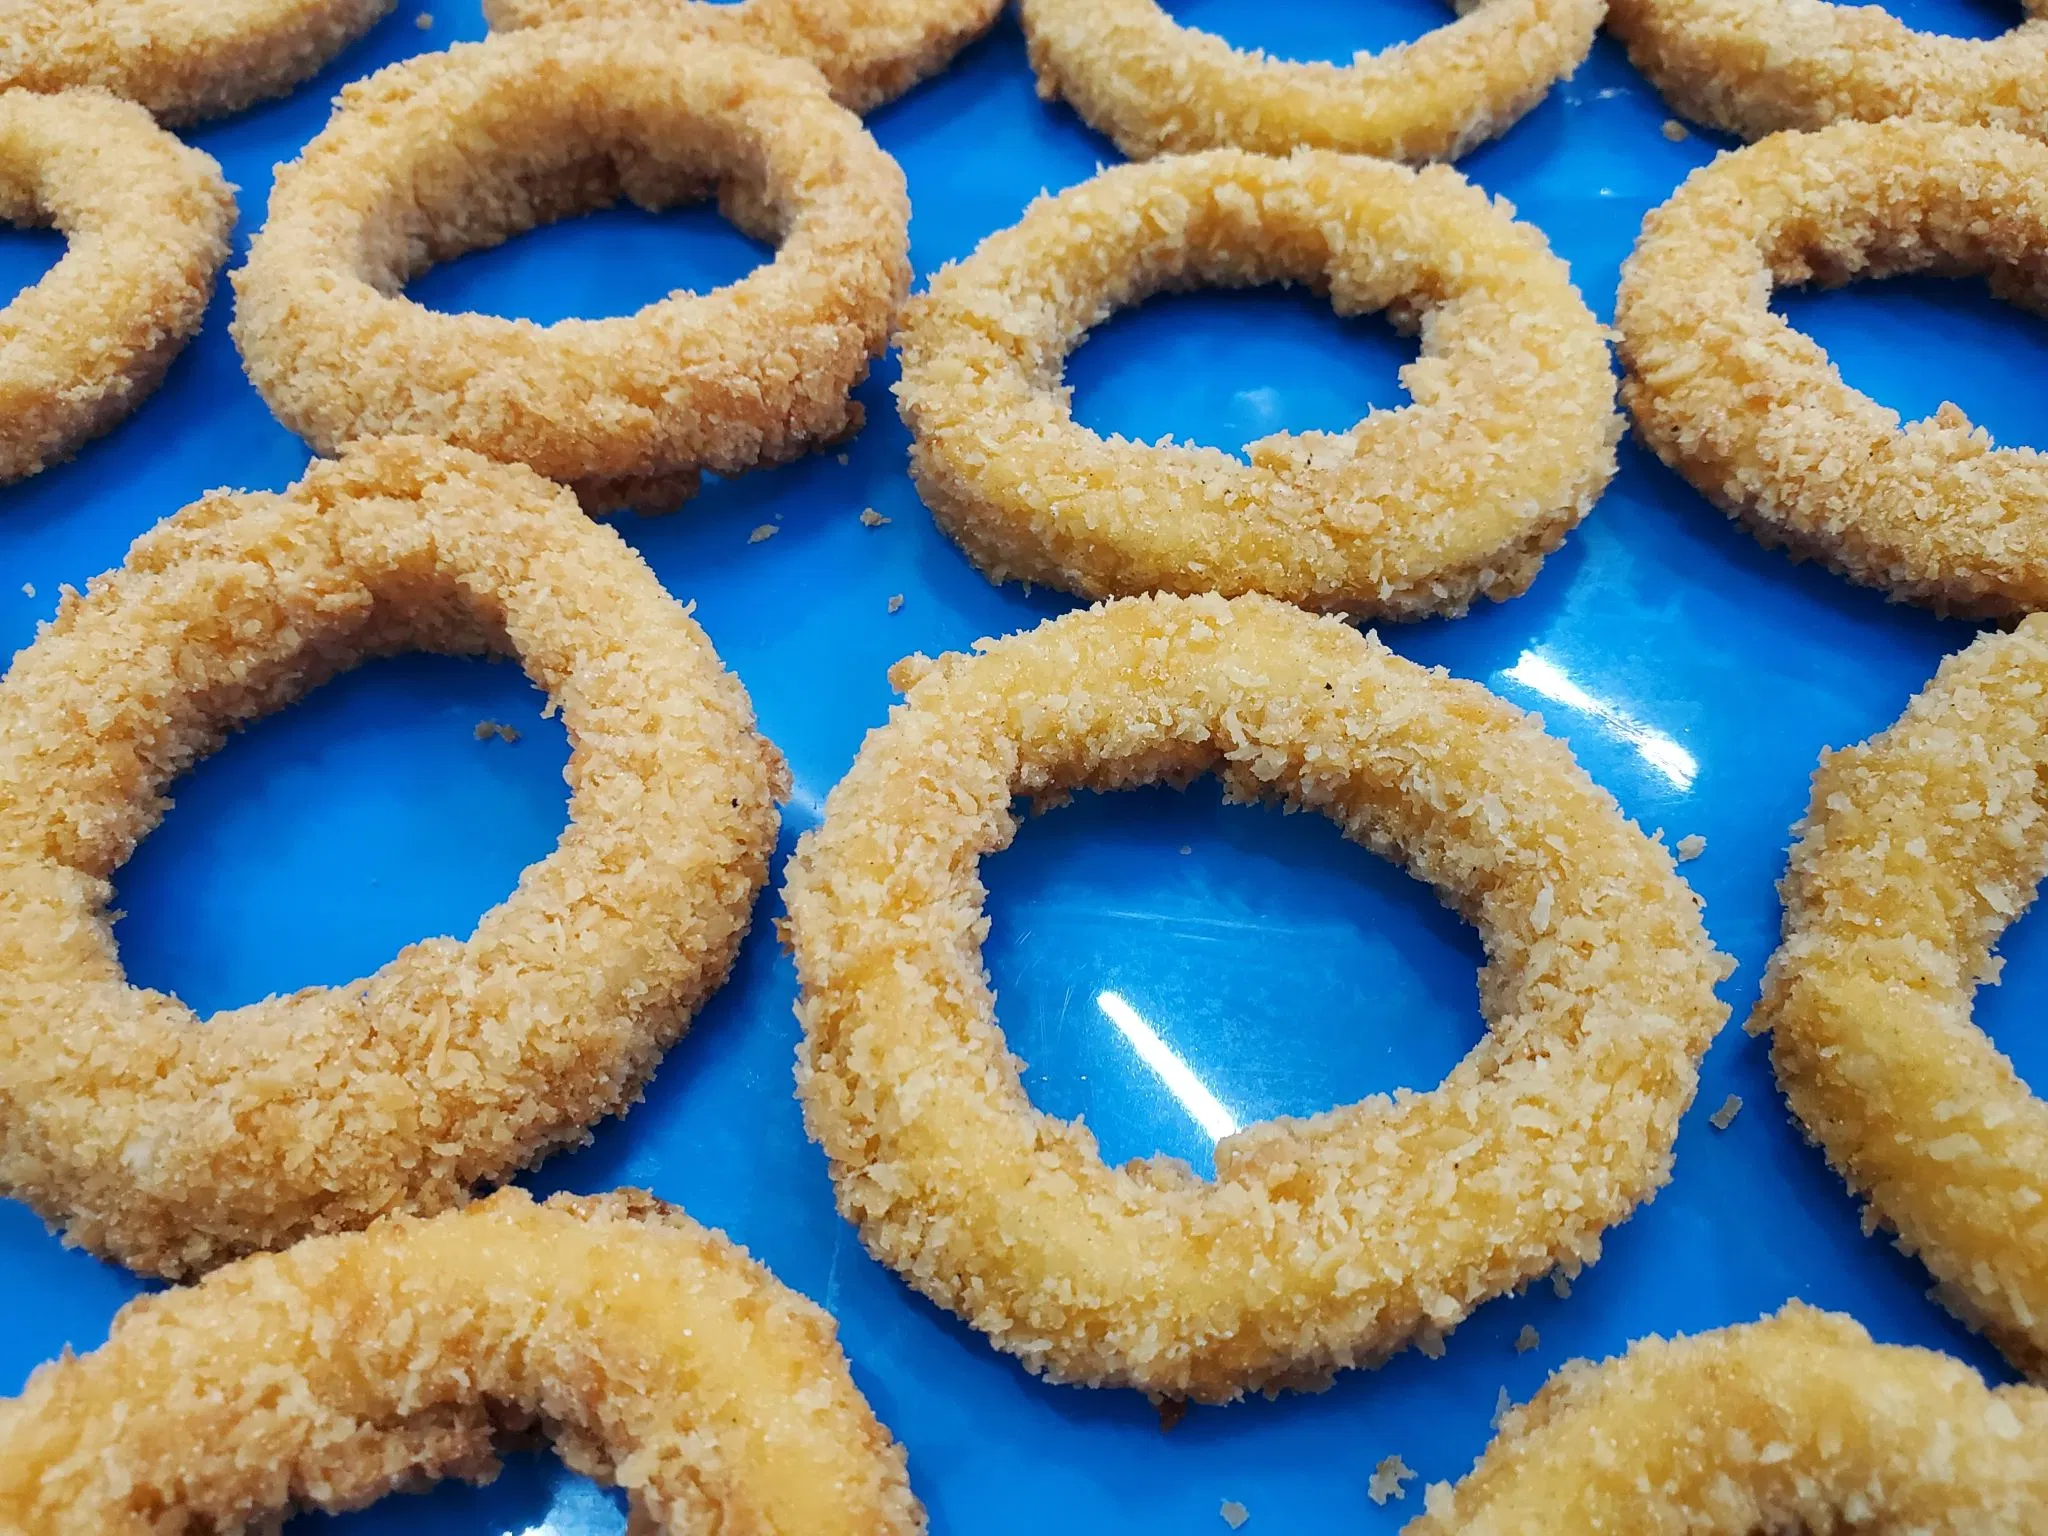 Frozen Hot Sell Delicious Seafood Breaded Fried Squid/Calamari Rings with Best Price